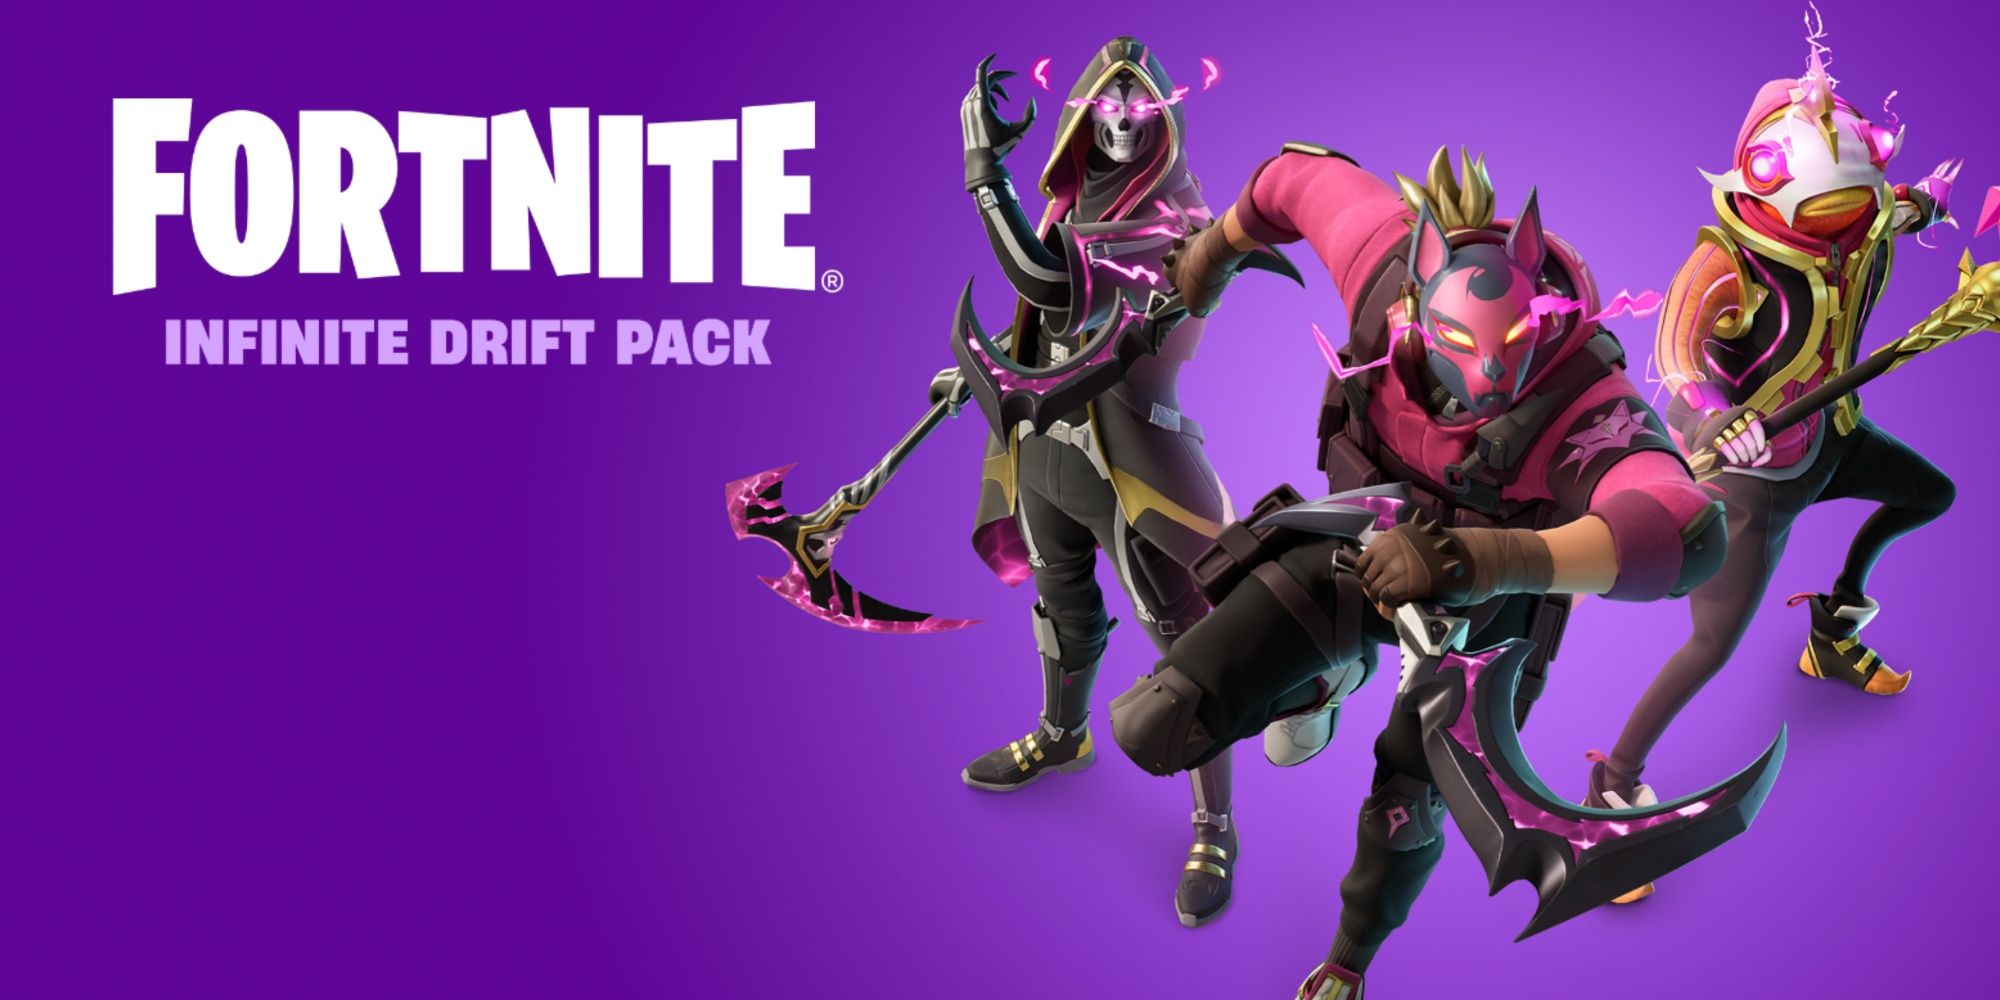 cosmetic items in the infinite drift pack